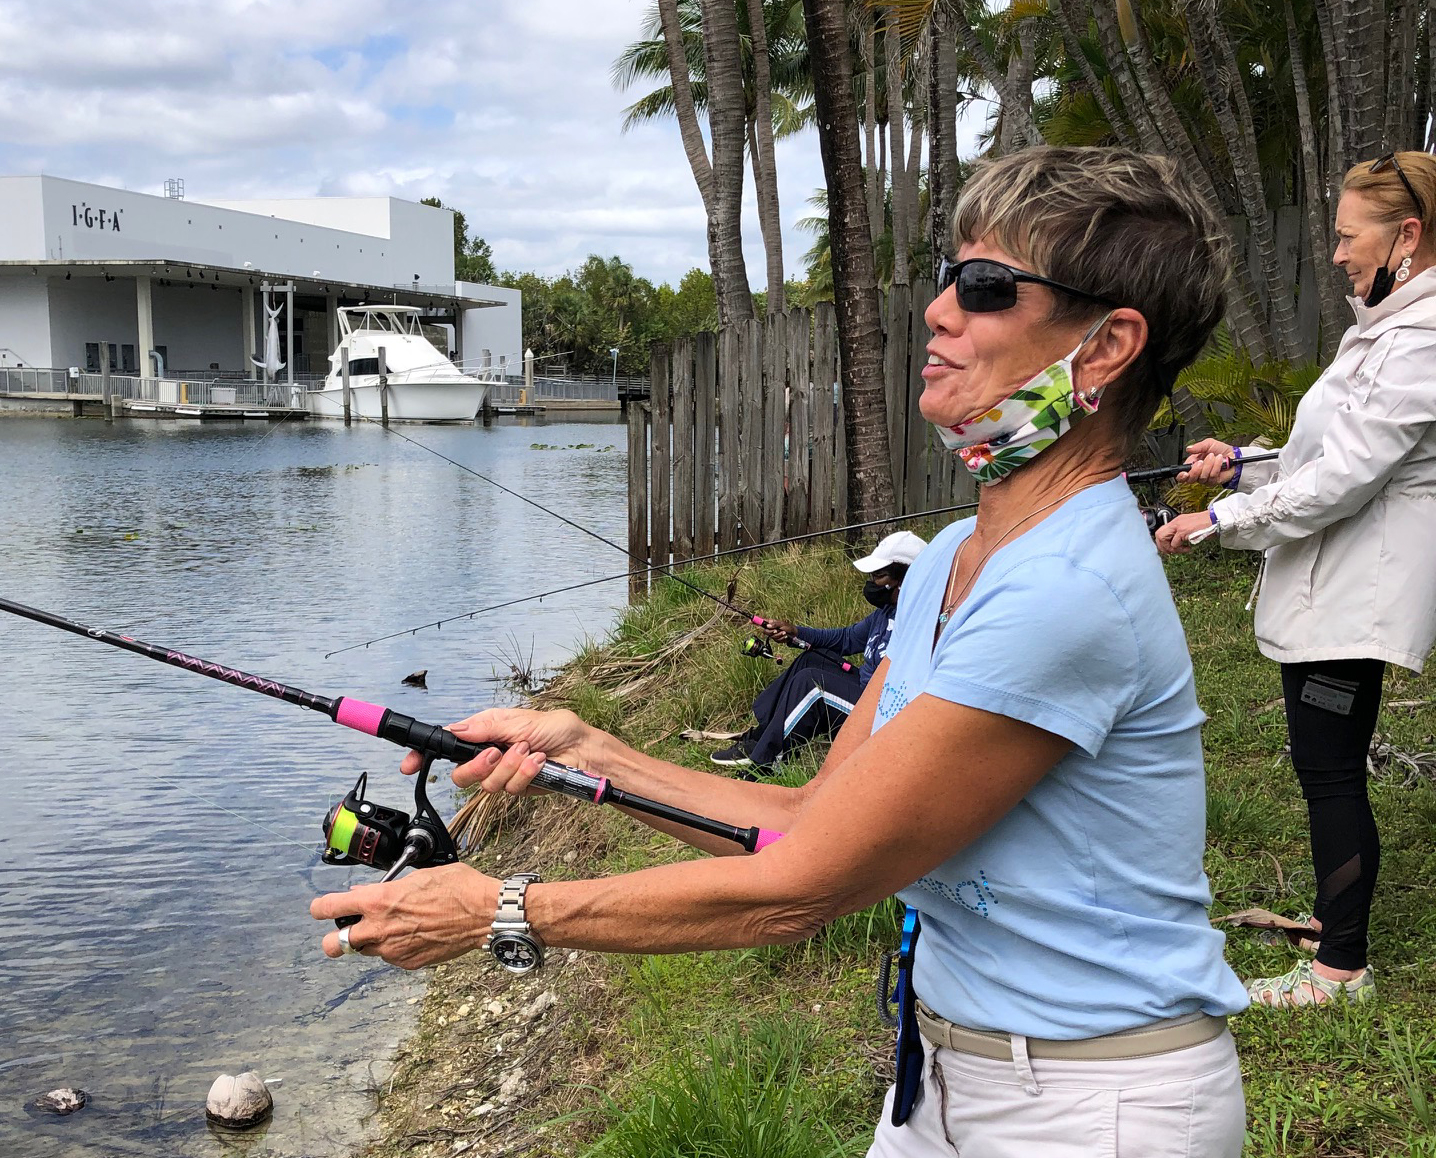 Marilyn DeMartini Fishing At The Ladies Lets Go Fishing Event in 2021